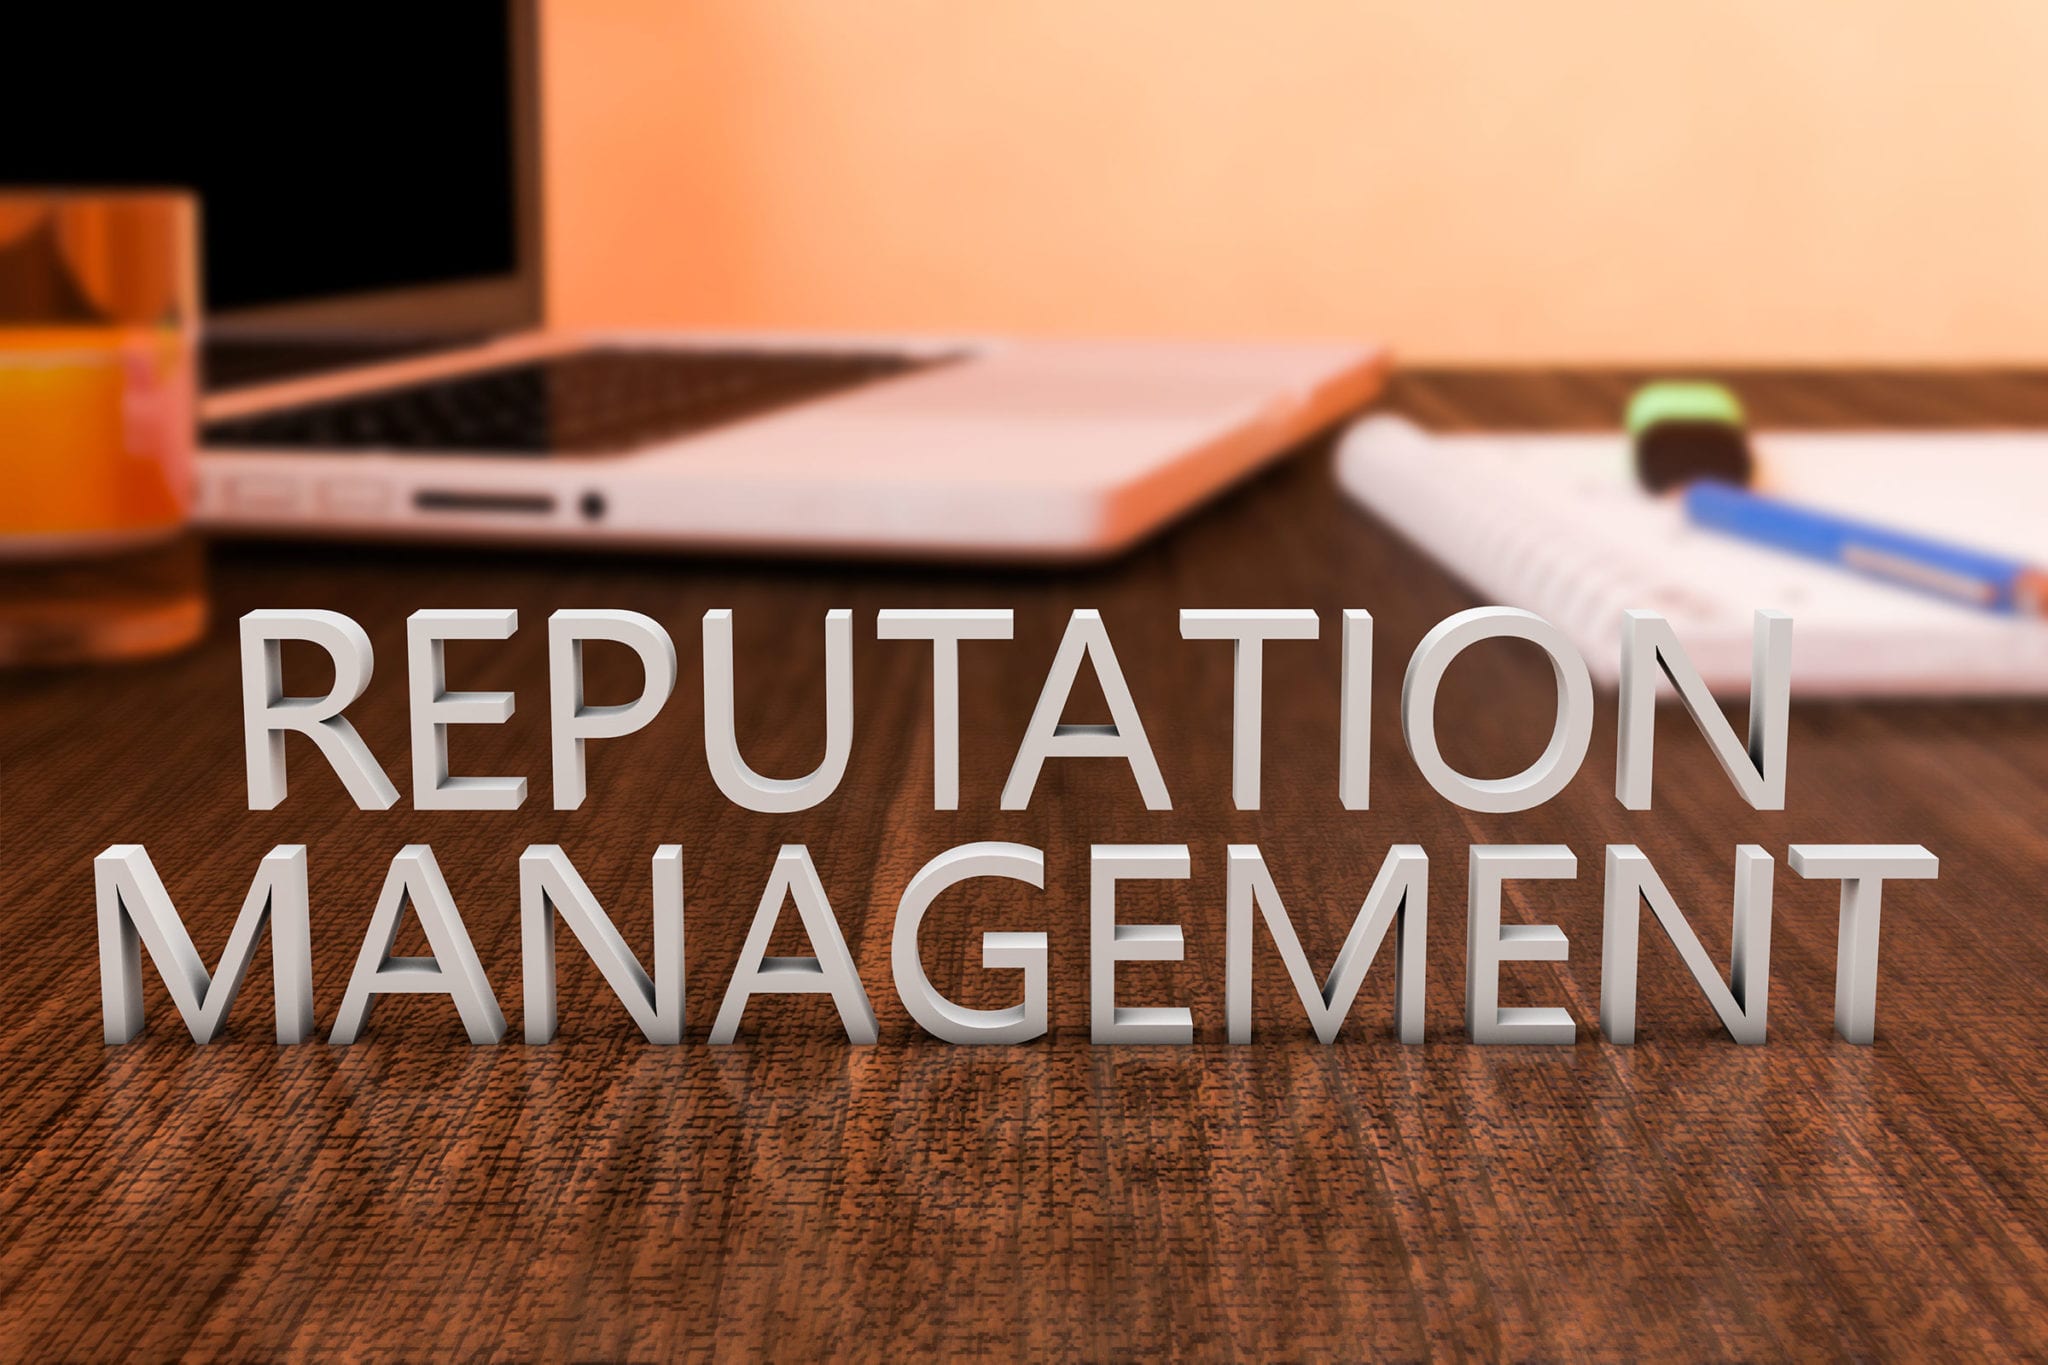 online management reputation strategy for businesses